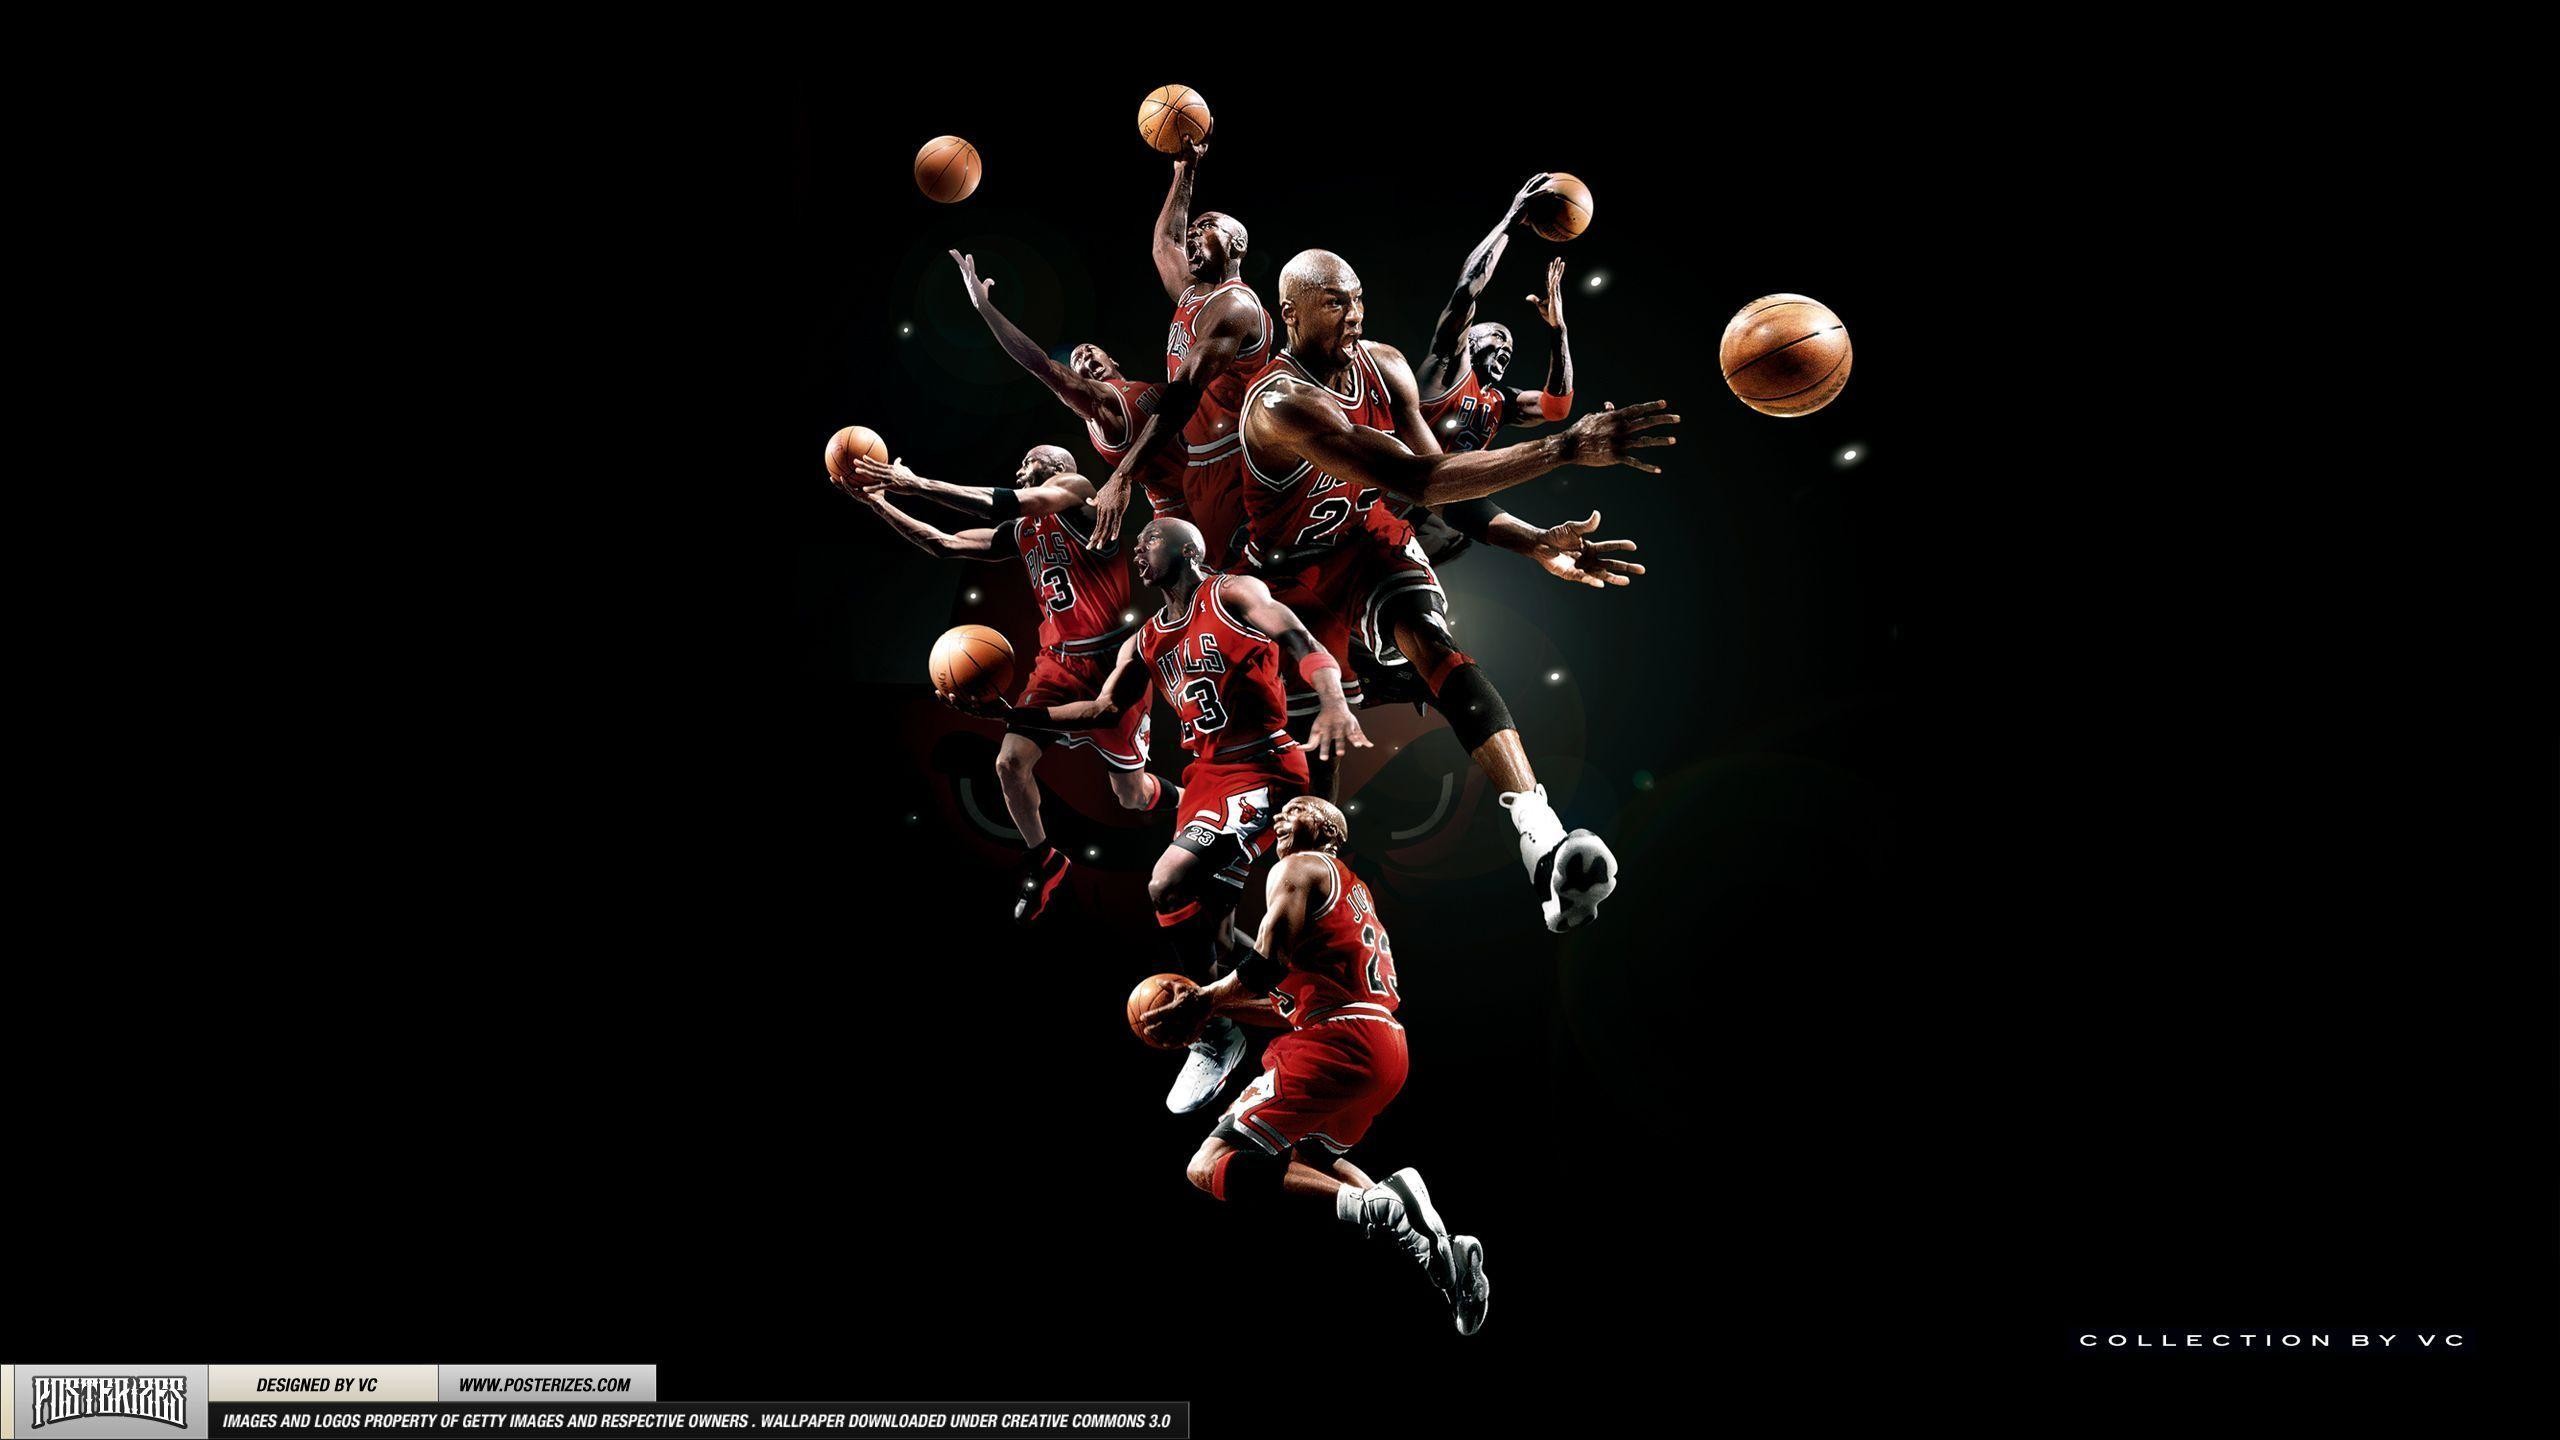 2560x1440 Michael Jordan Hd Wallpapers and Background